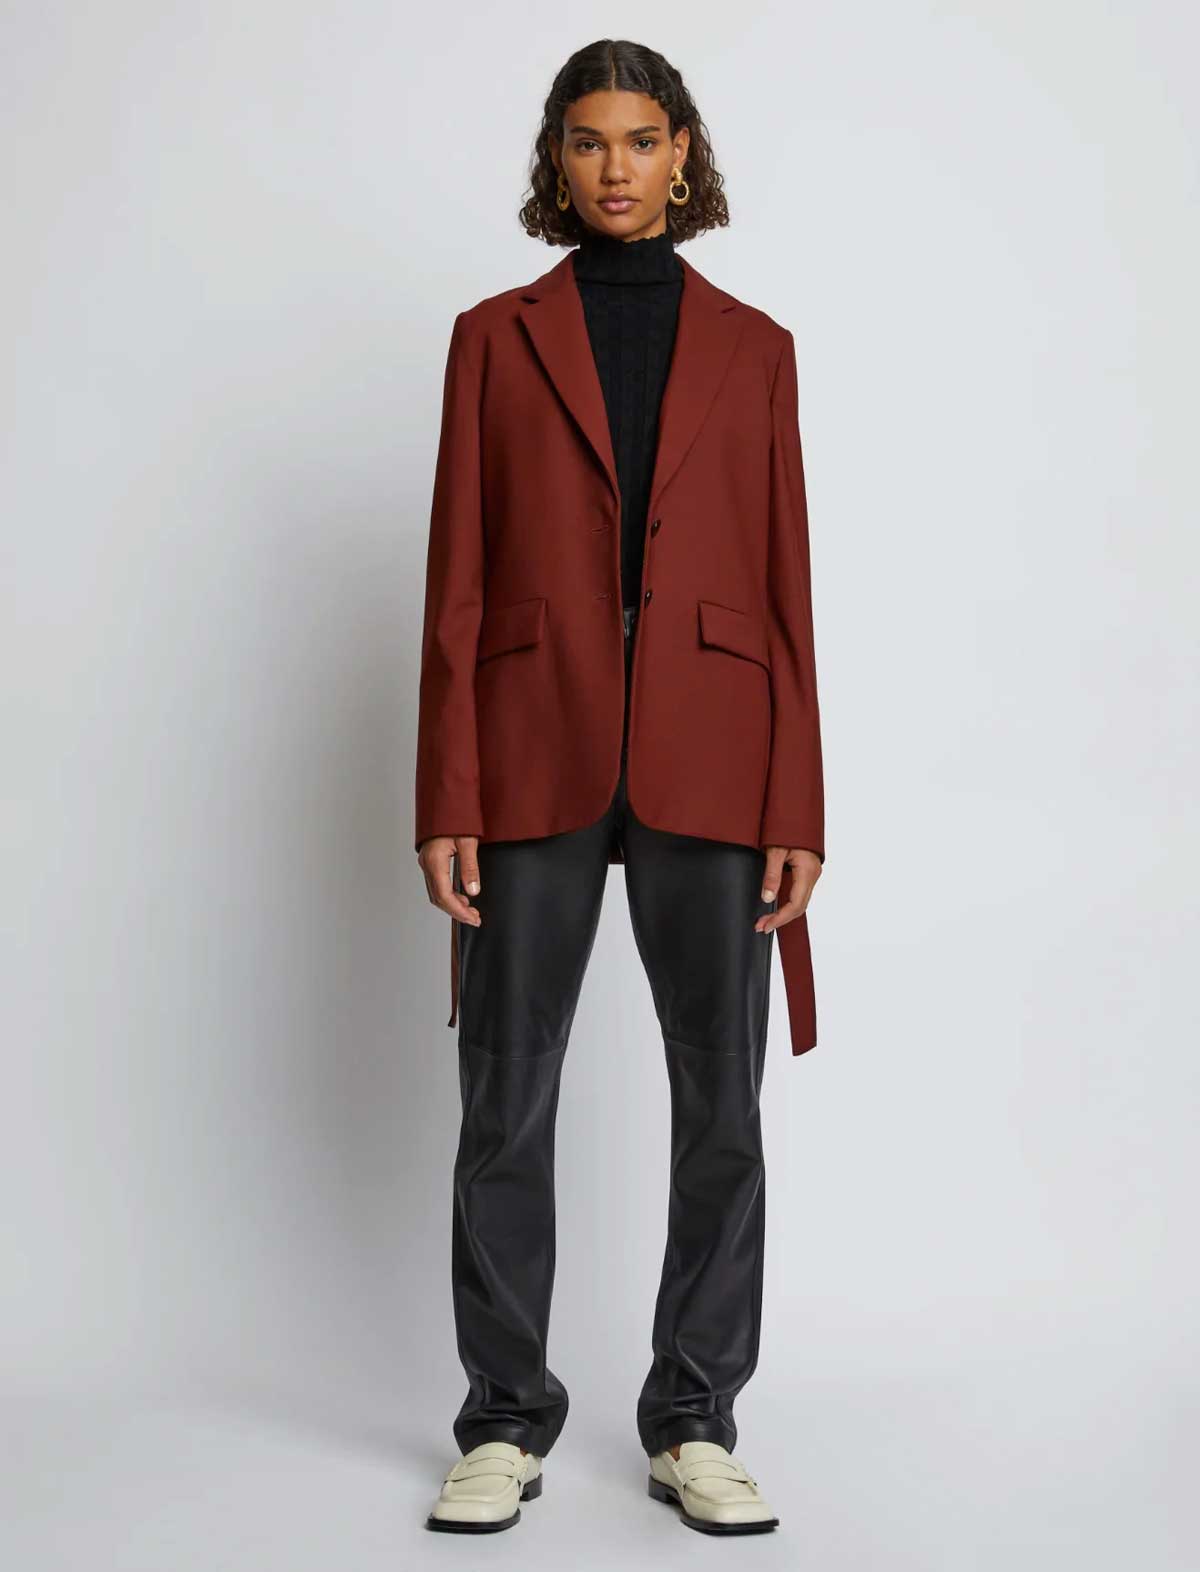 PROENZA SCHOULER WHITE LABEL Suiting Relaxed Tie Blazer in Maple